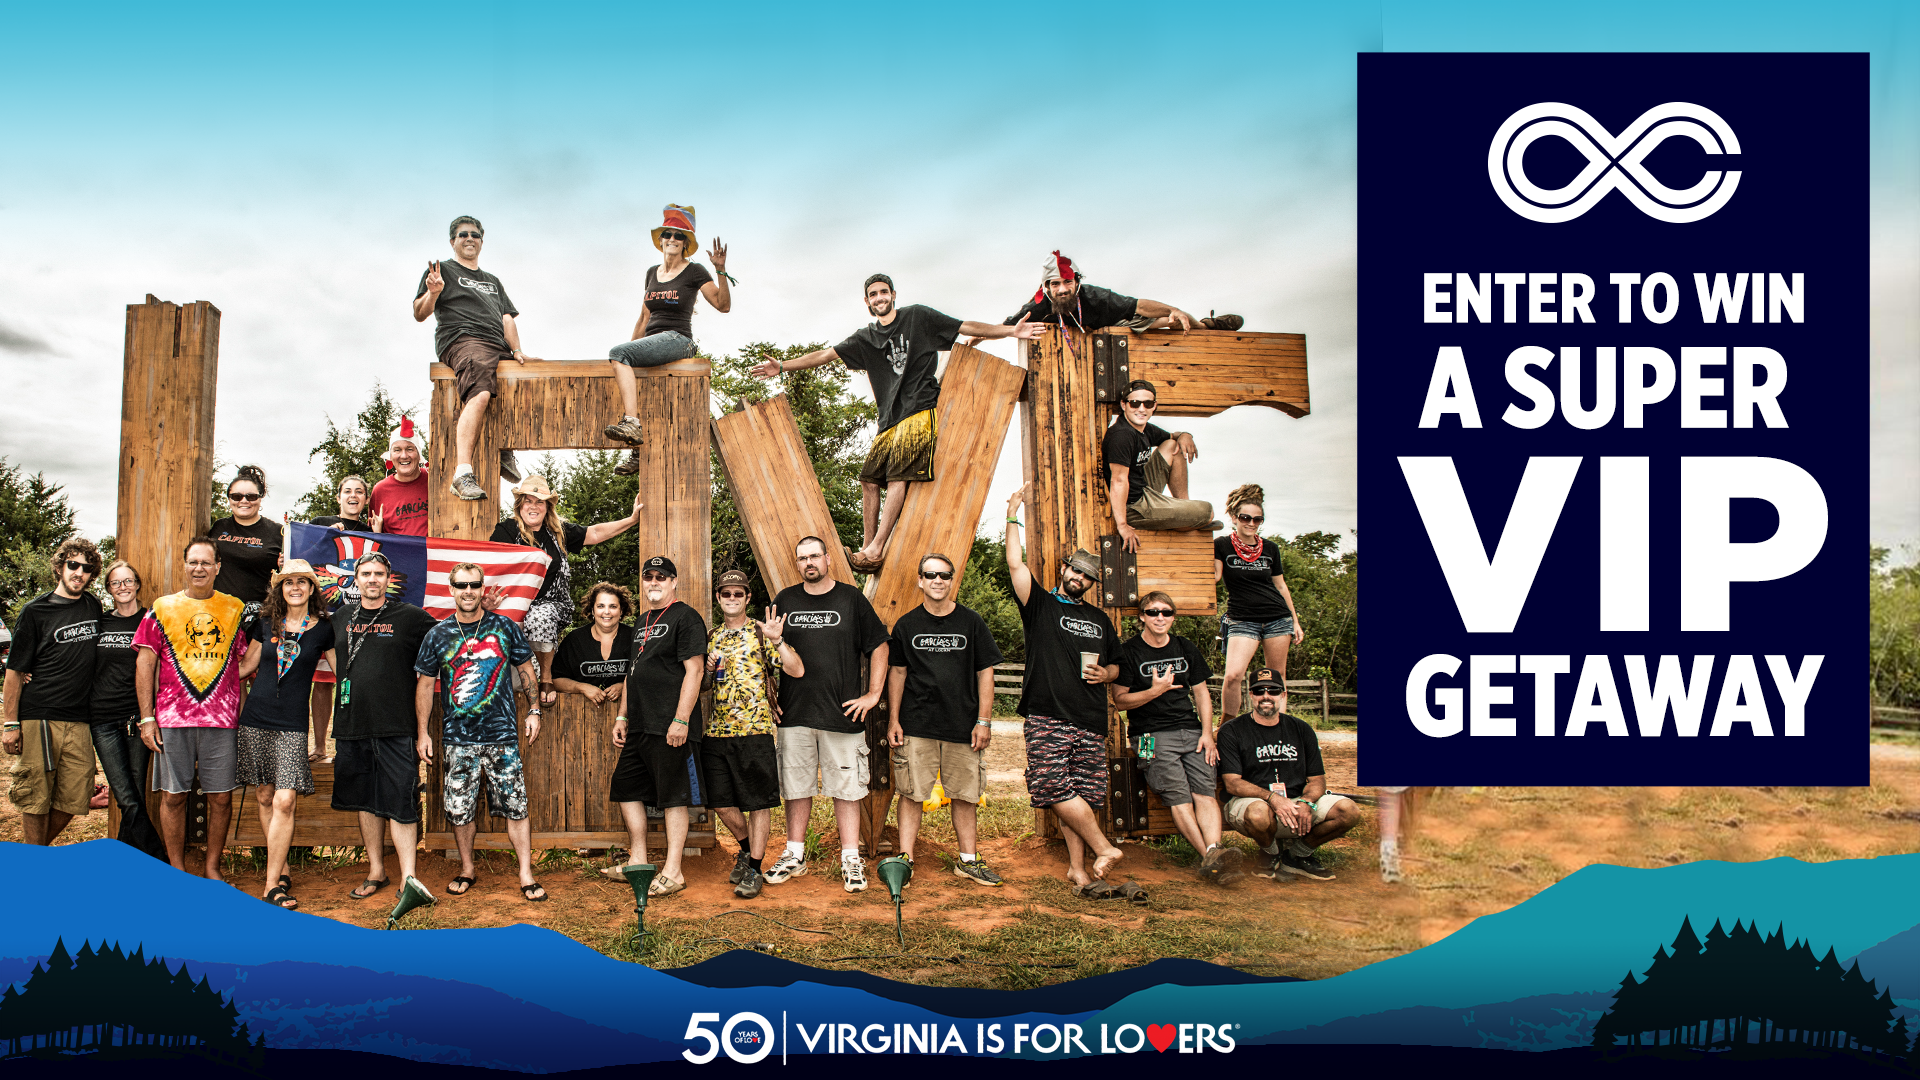 Win a Pair of SUPER VIP Passes with Car Camping to LOCKN’!